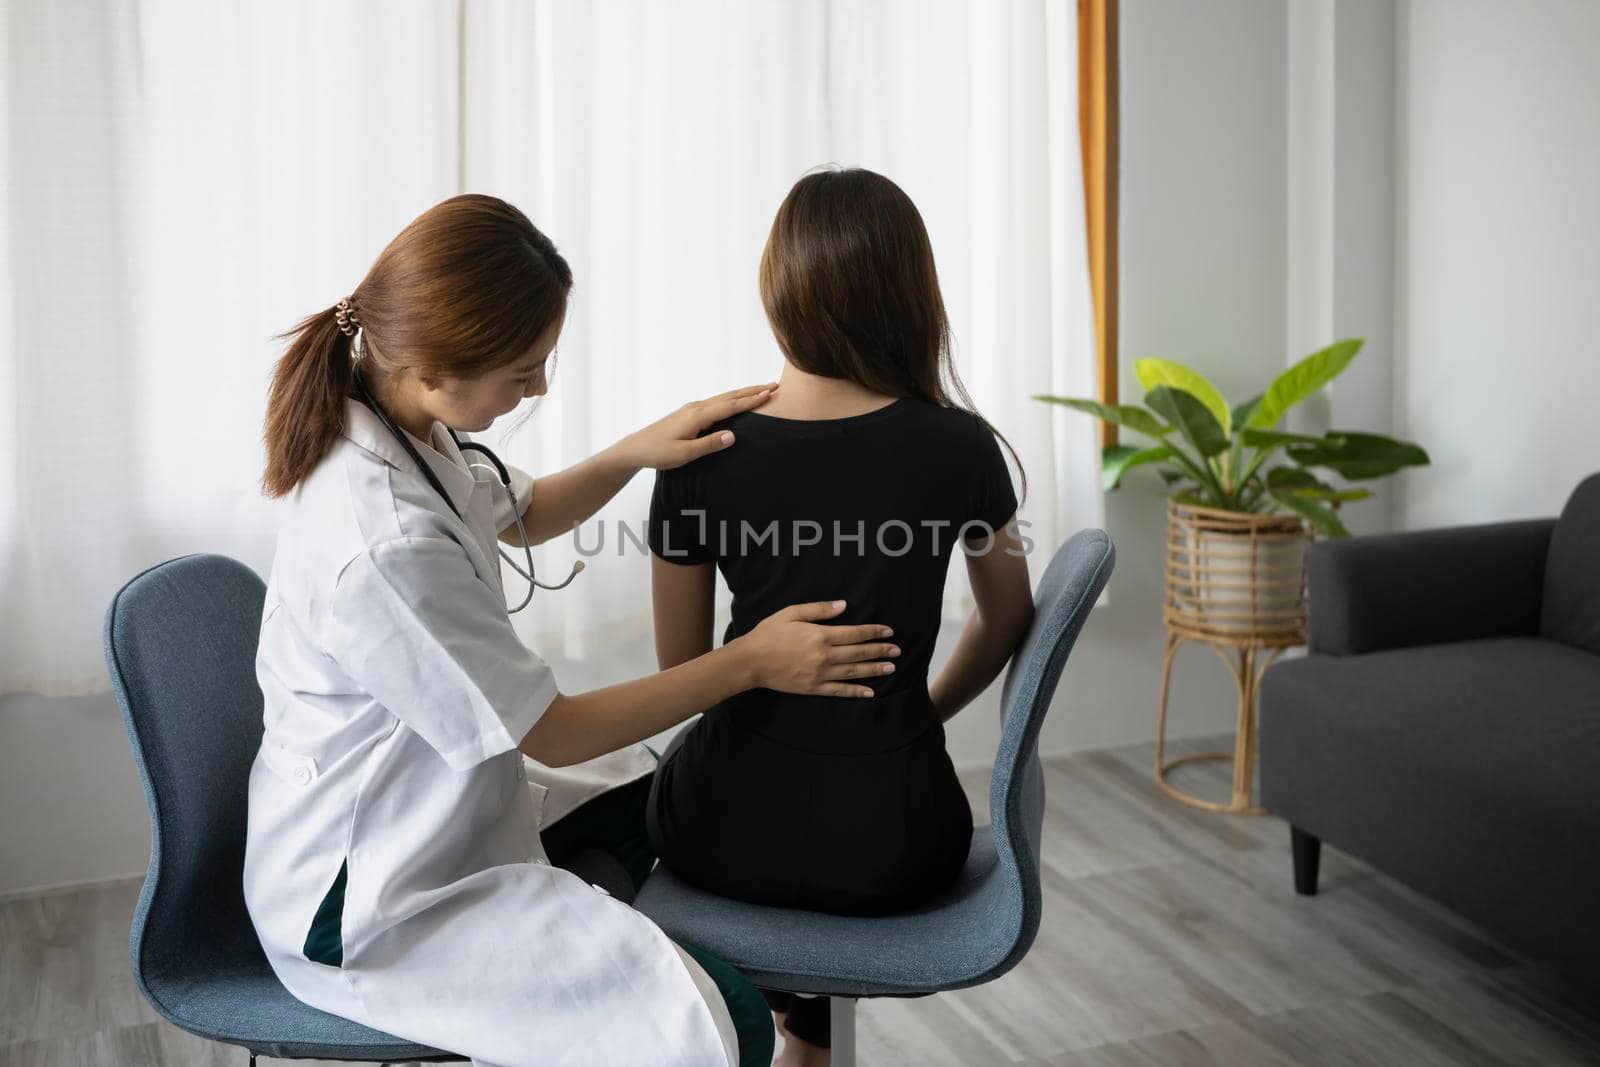 Physiotherapist examining treating injured back female patient in clinic.